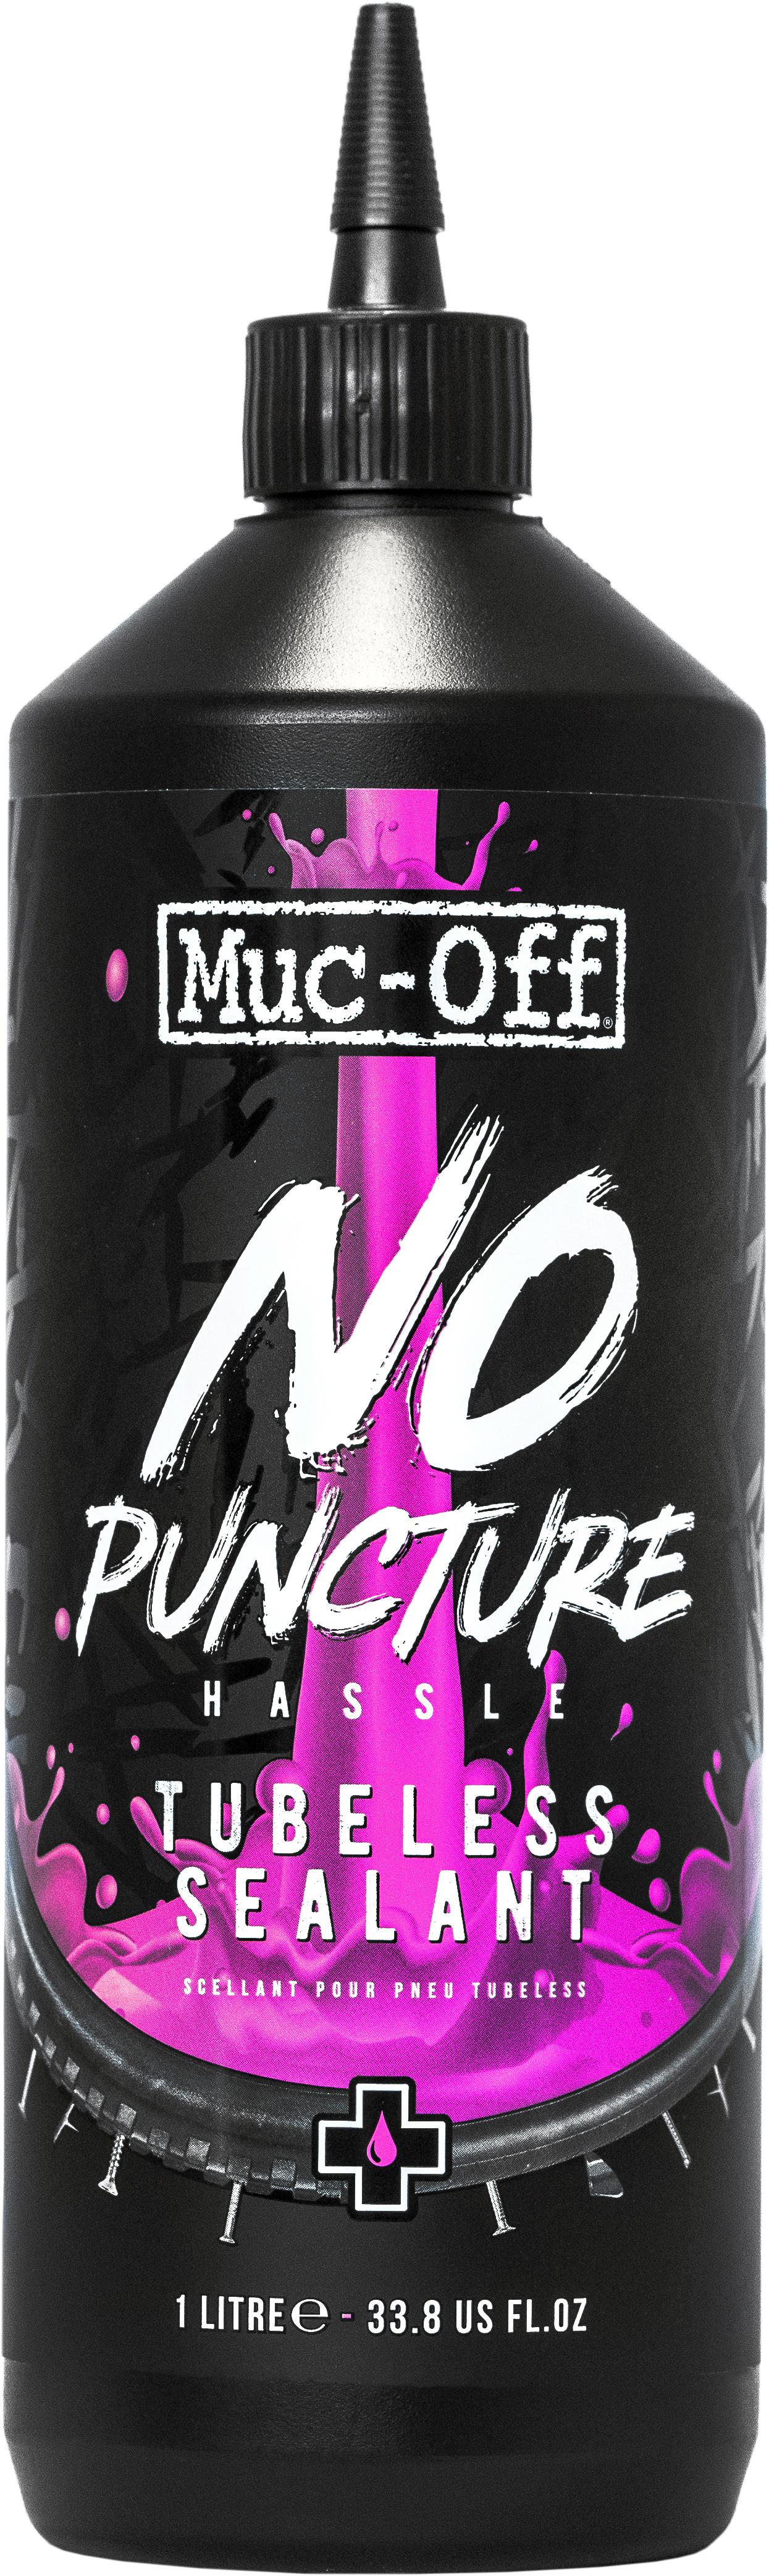 Muc-off No Puncture Hassle Tubeless Kit (1l) - Black